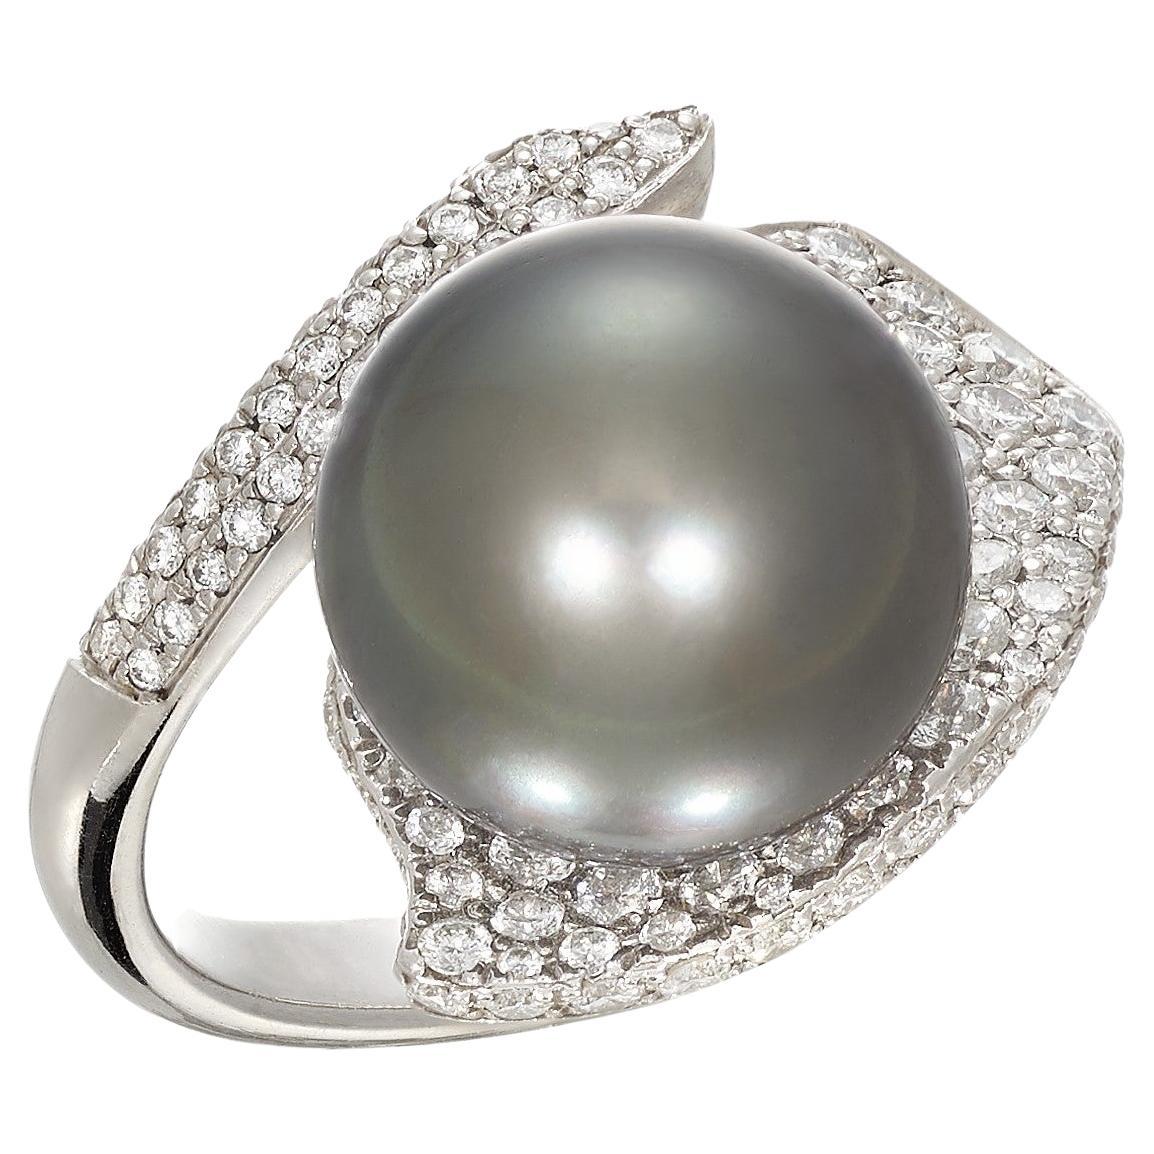 Contemporary "Tahitian" Pearl and Diamond Cocktail Ring Set in Platinum